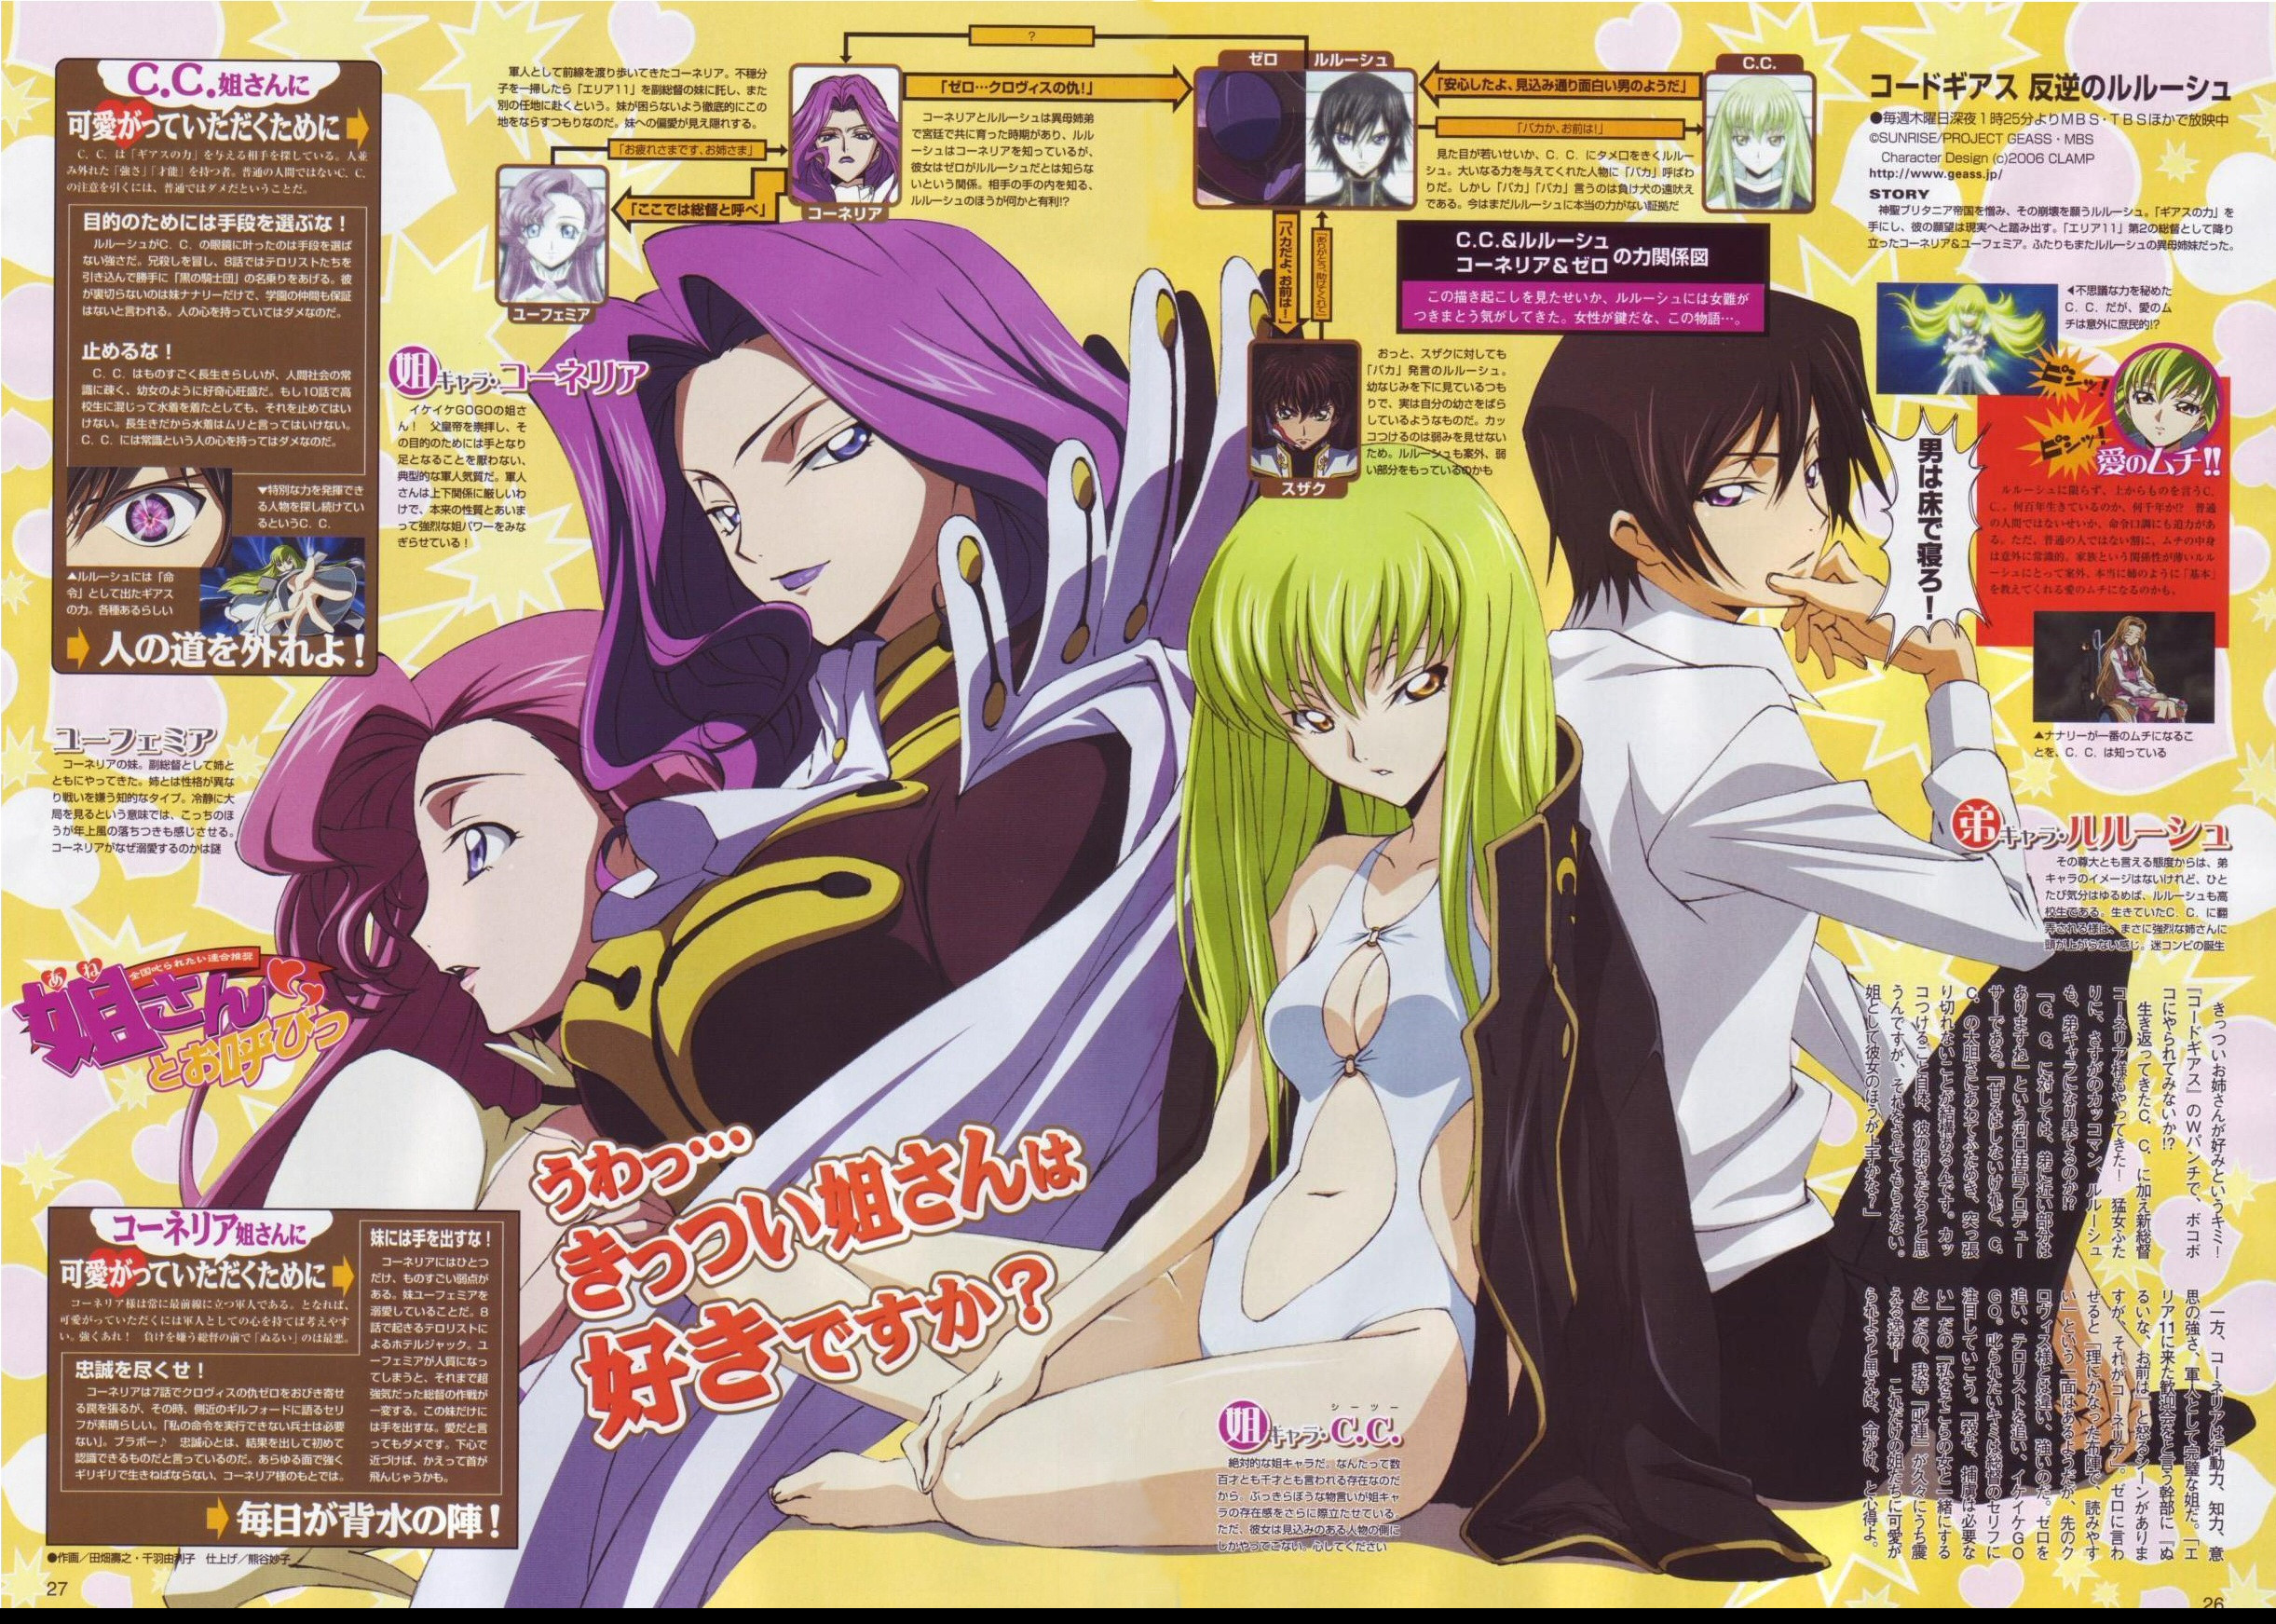 Top 20 Anime You Should Watch on Your Last Day Alive code geass